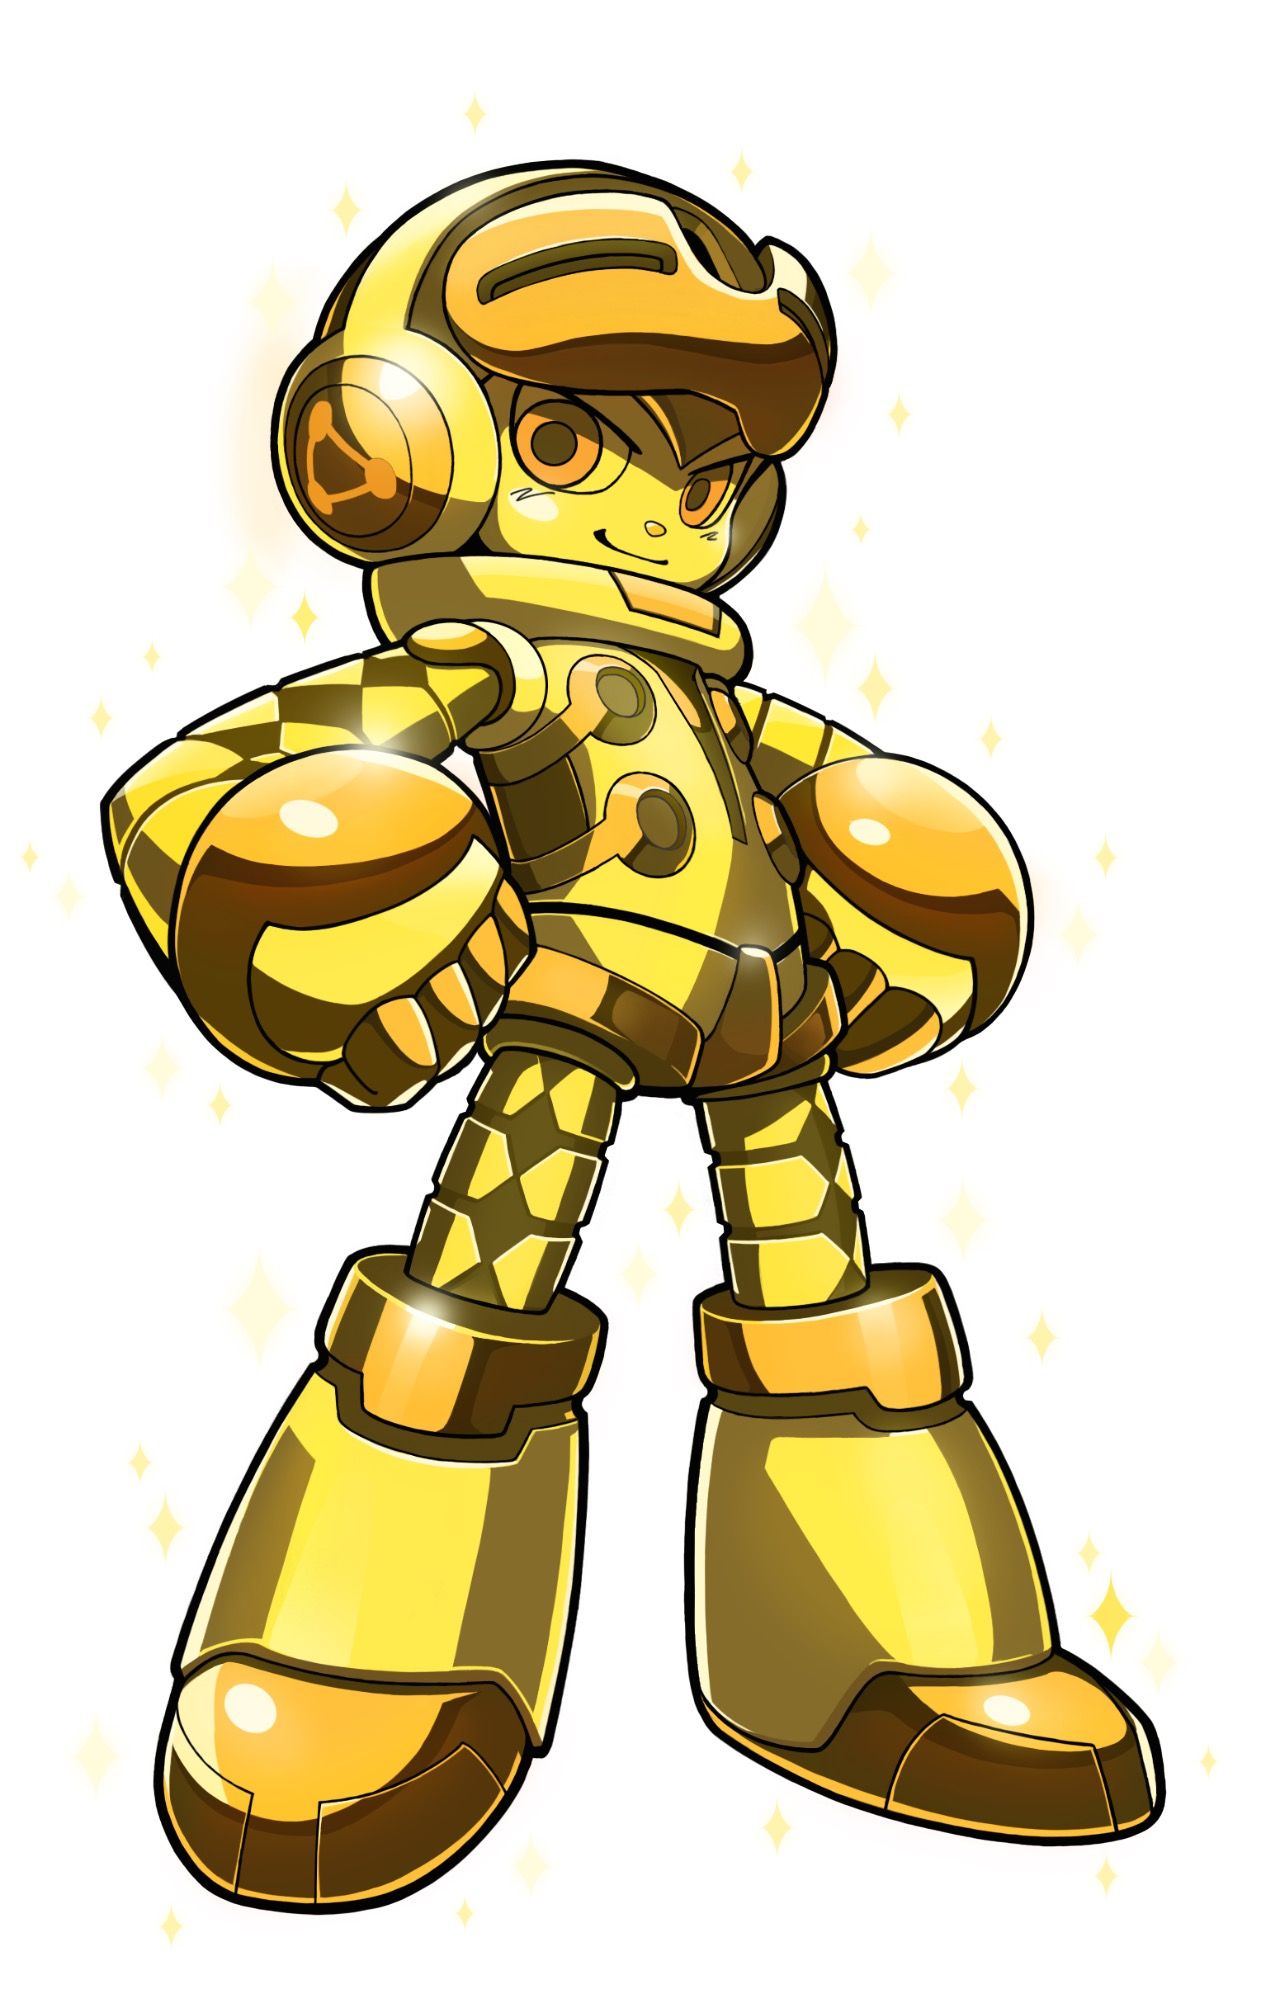 Mighty No 9 gold